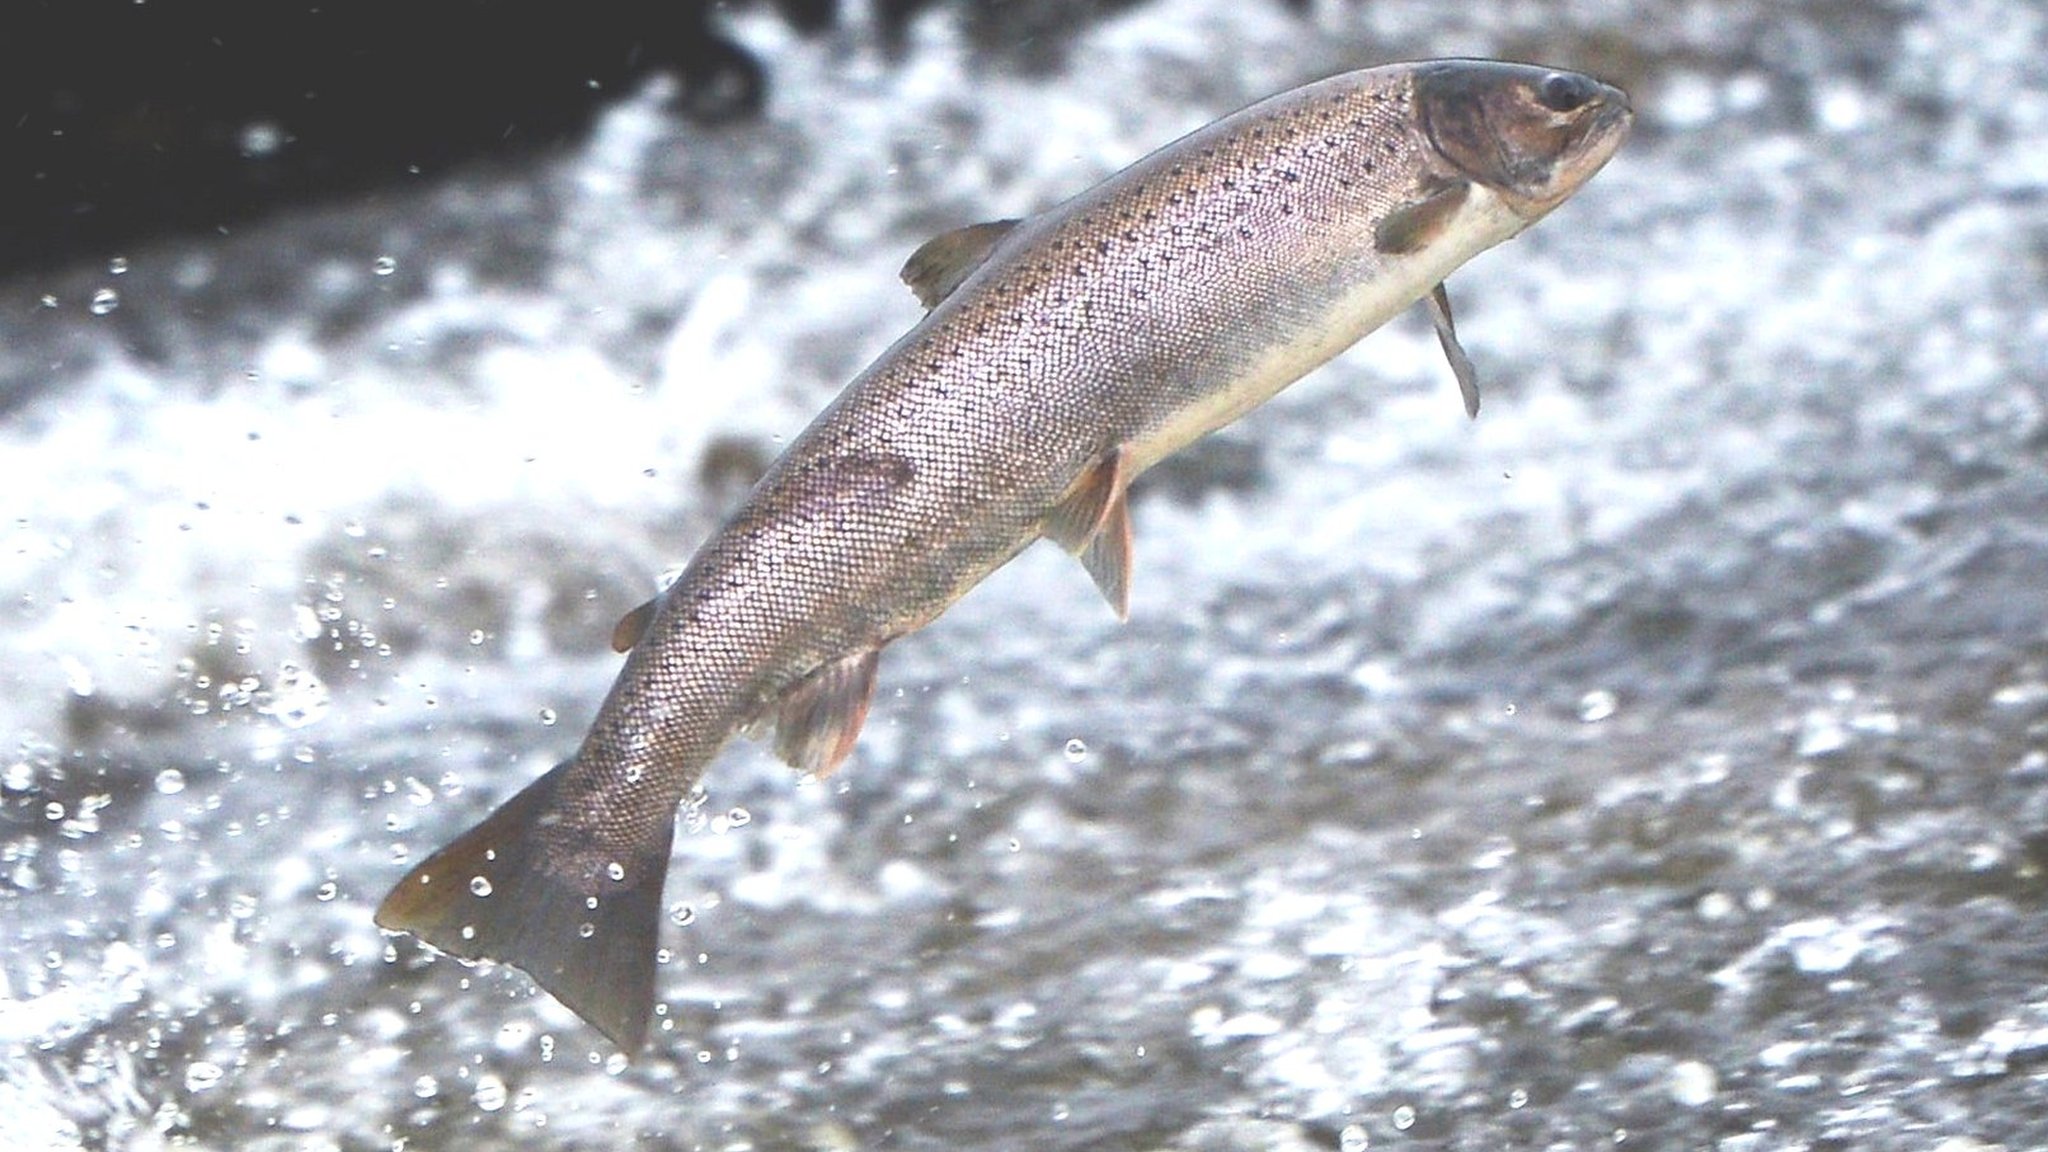 Fish stock concerns grow amid low water levels